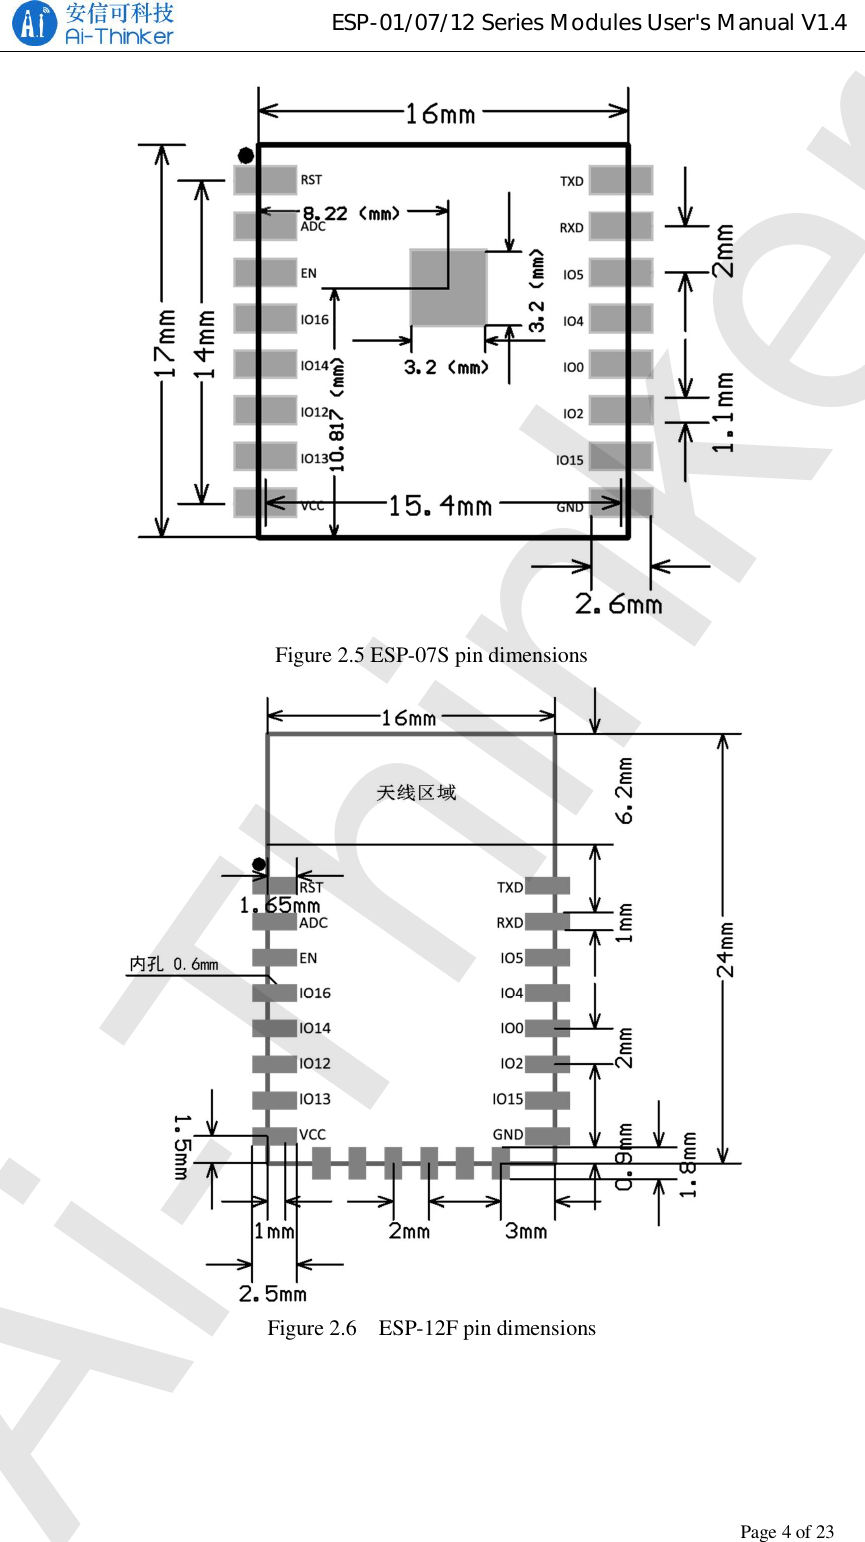 ESP-01/07/12 Series Modules User&apos;s Manual V1.4Copyright © 2017 Shenzhen Ai-Thinker Technology Co., Ltd All Rights ReservedPage4of23Figure 2.5 ESP-07S pin dimensionsFigure 2.6   ESP-12F pin dimensionsAi-Thinker